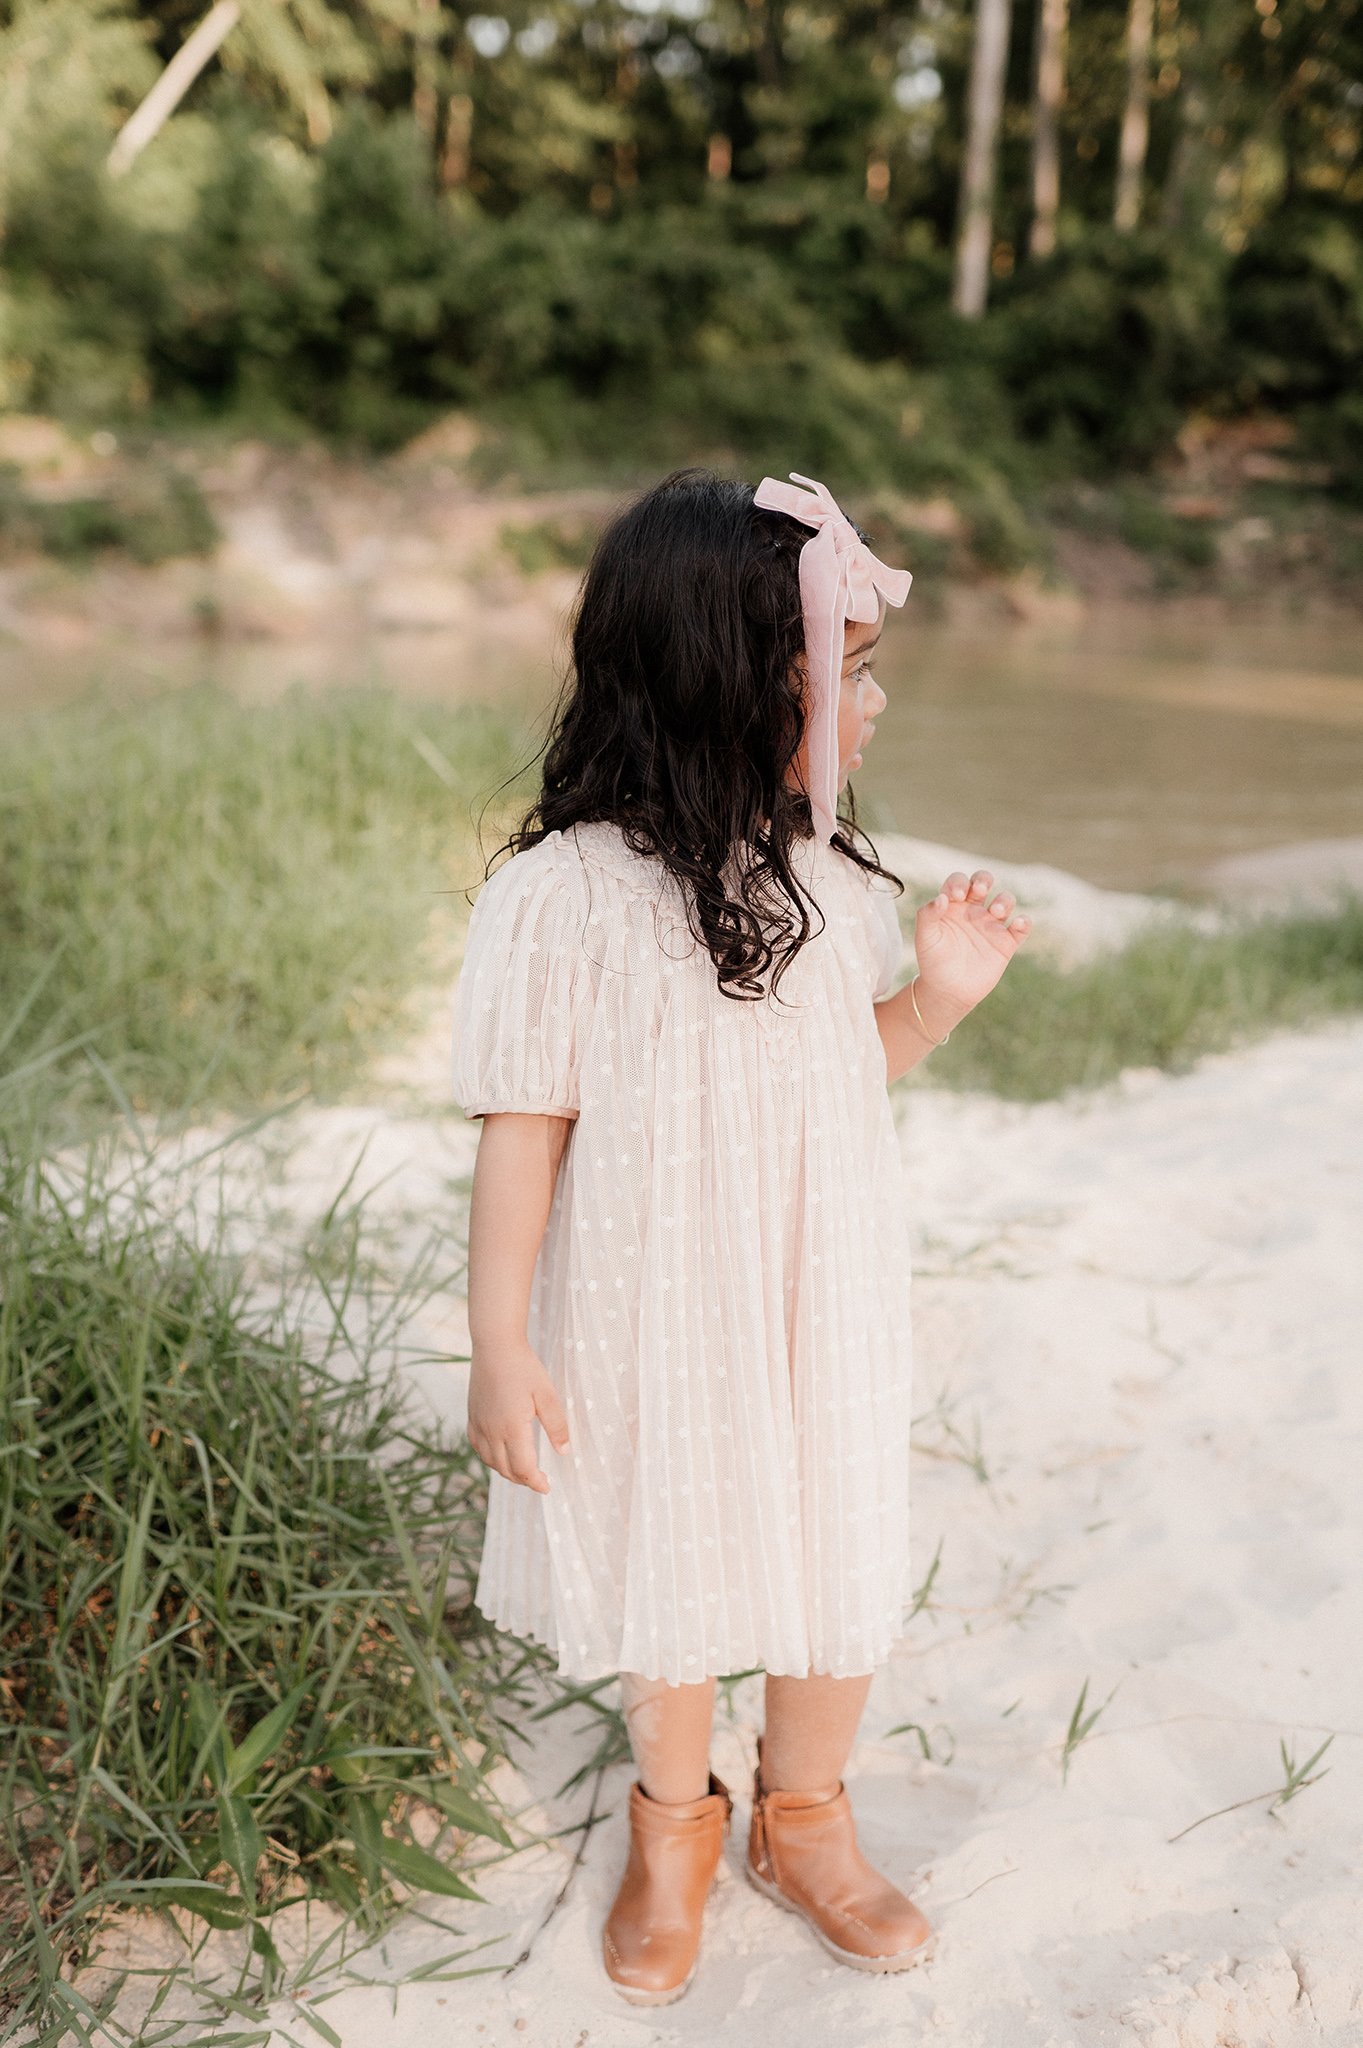 the woodlands family photographer _ conroe photographer _ houston family photographer _ ashley gillen photography _ texas family photographer _ conroe wedding photographer _ conroe texas _ cshi32.jpg